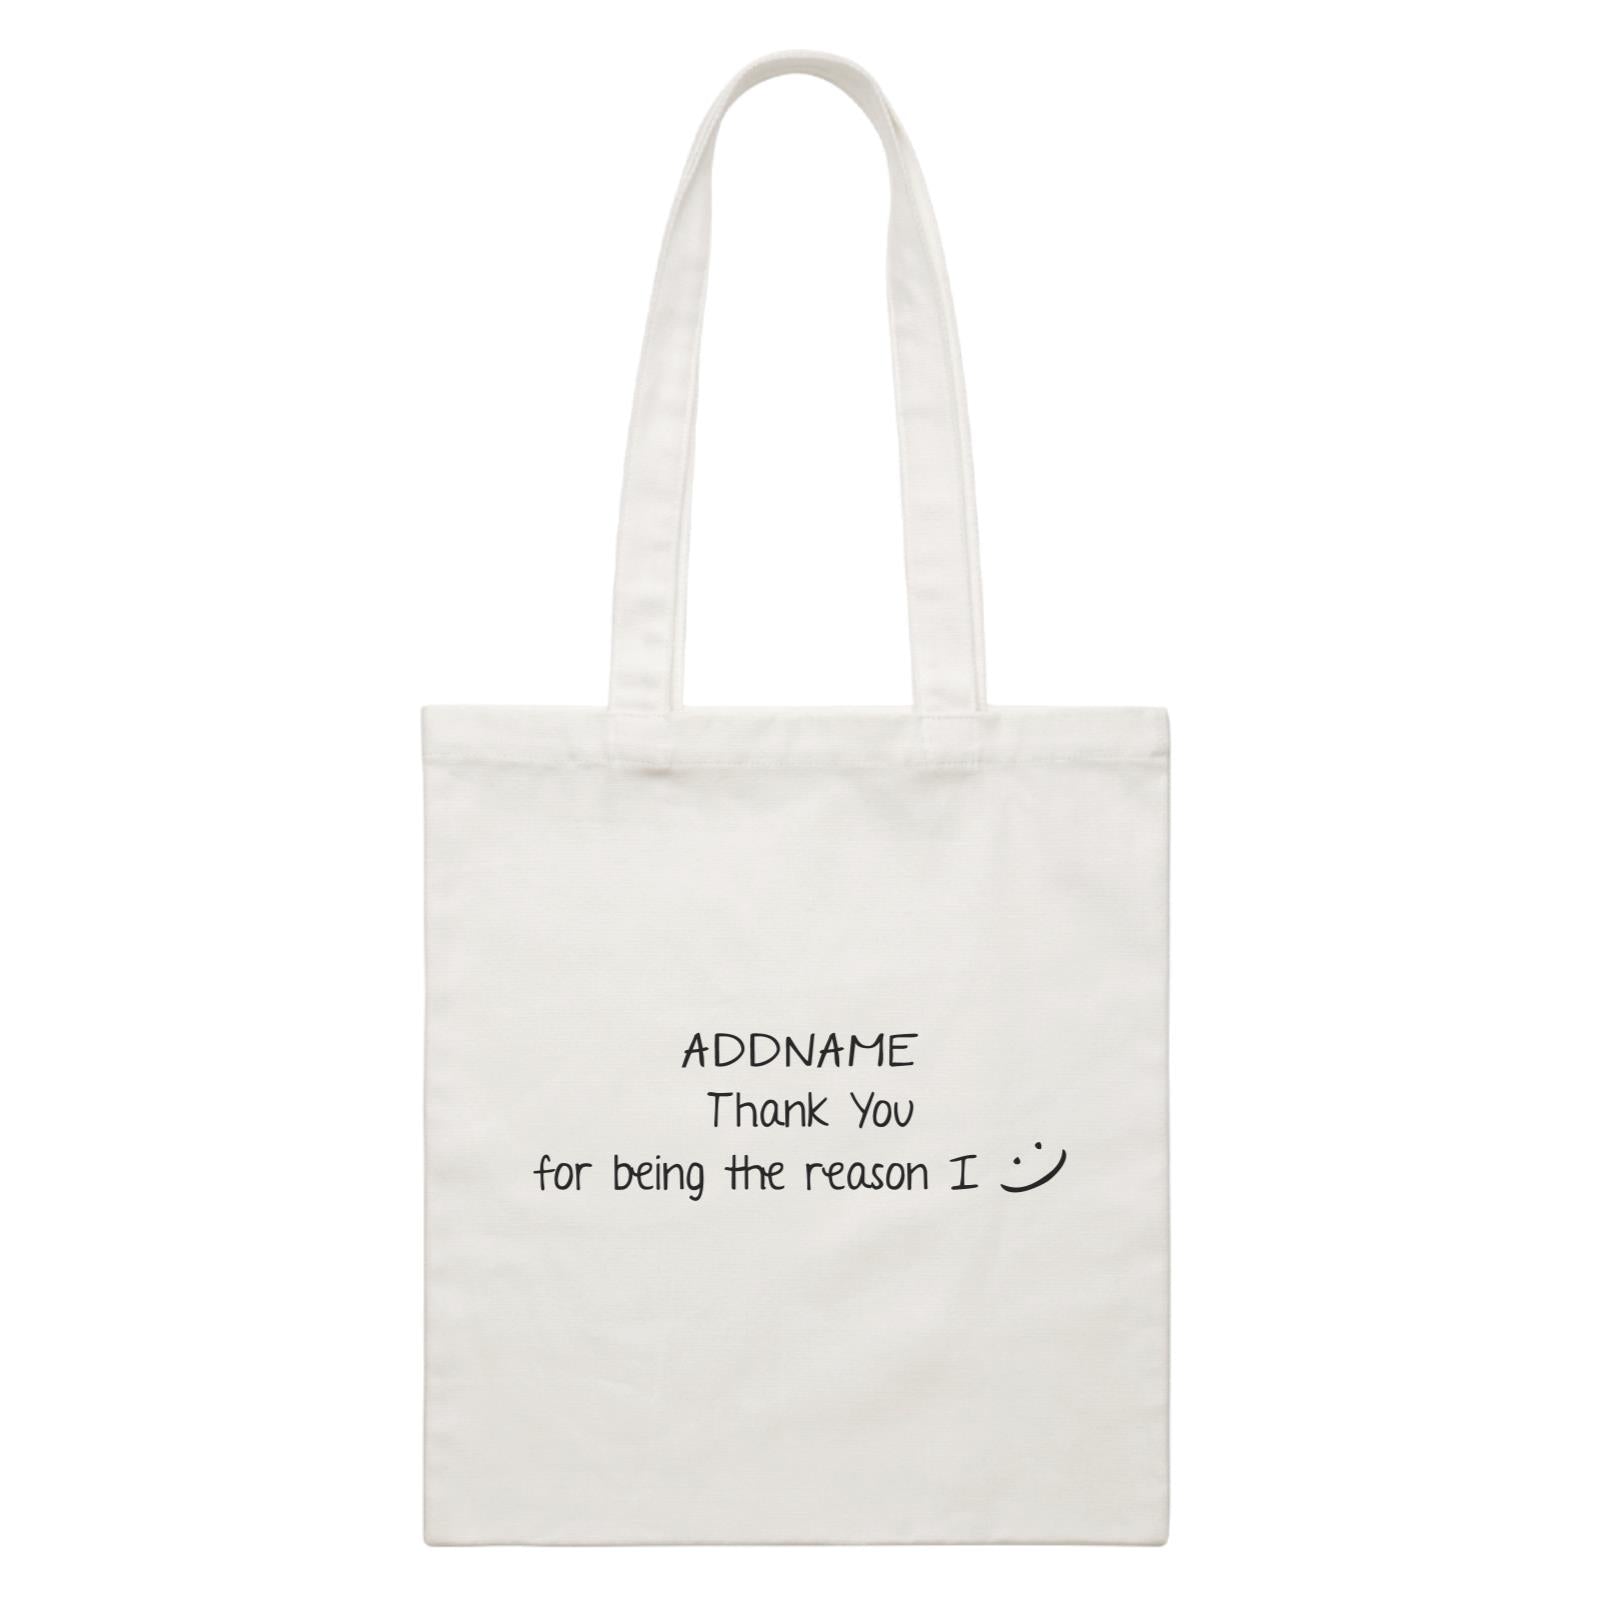 Best Friends Quotes Addname Thank You For Being The Reason I Smiley Face White Canvas Bag